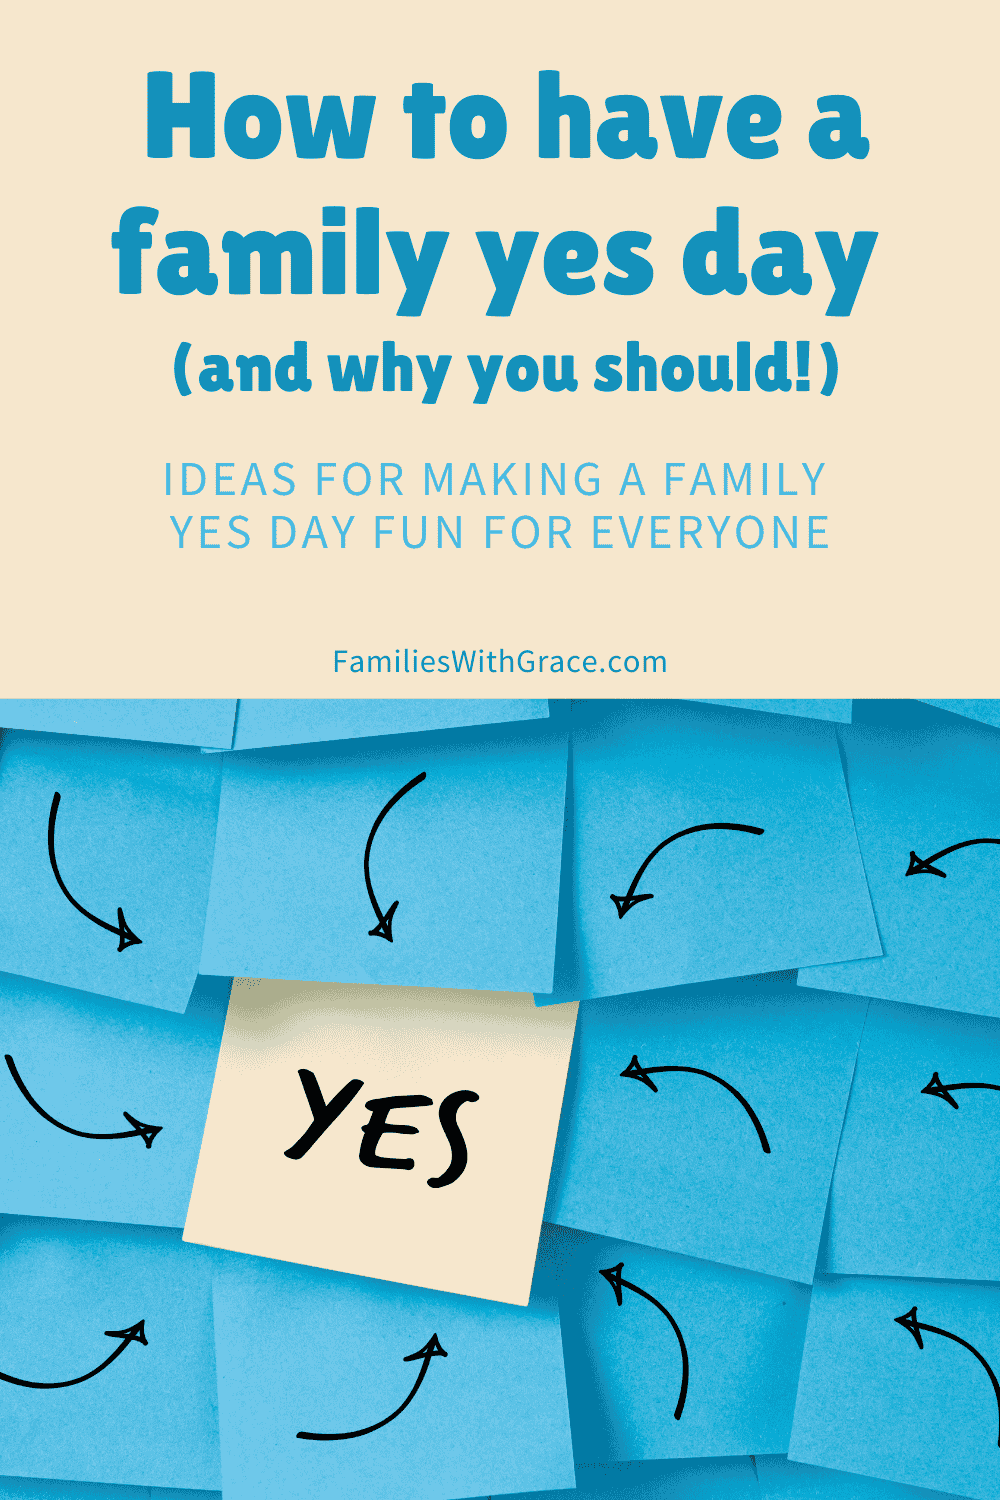 How to have a family yes day (and why you should!)